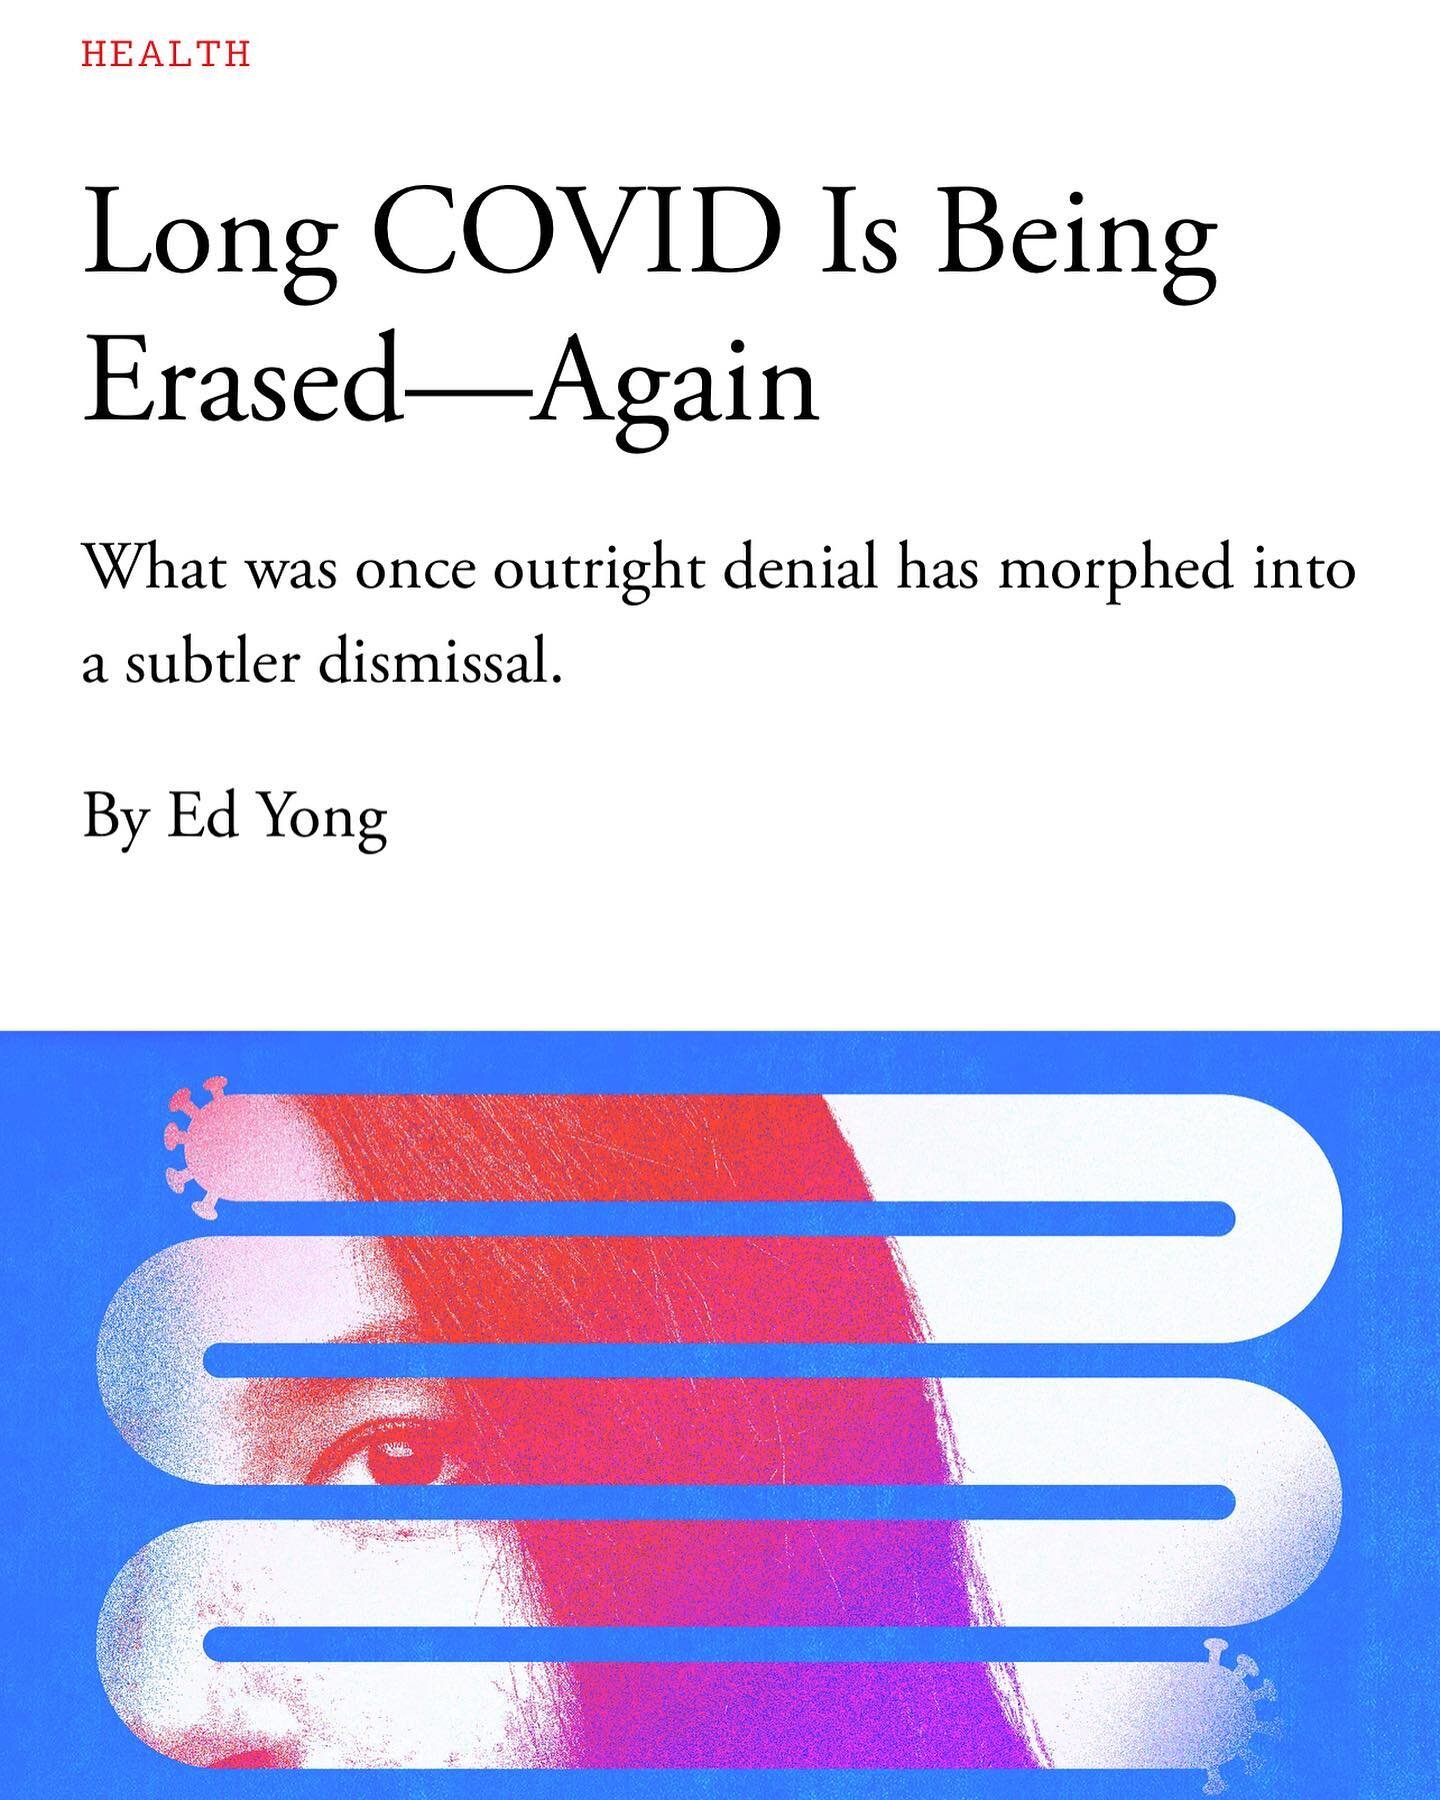 This article by the amazing Ed Yong is a must read. &ldquo;Like many long-haulers, McCone is duct-taping himself together to live a life&mdash;and few see the tape.&rdquo;(see link in profile) @theatlantic 

.#longillness #longcovid #recovery #covid 